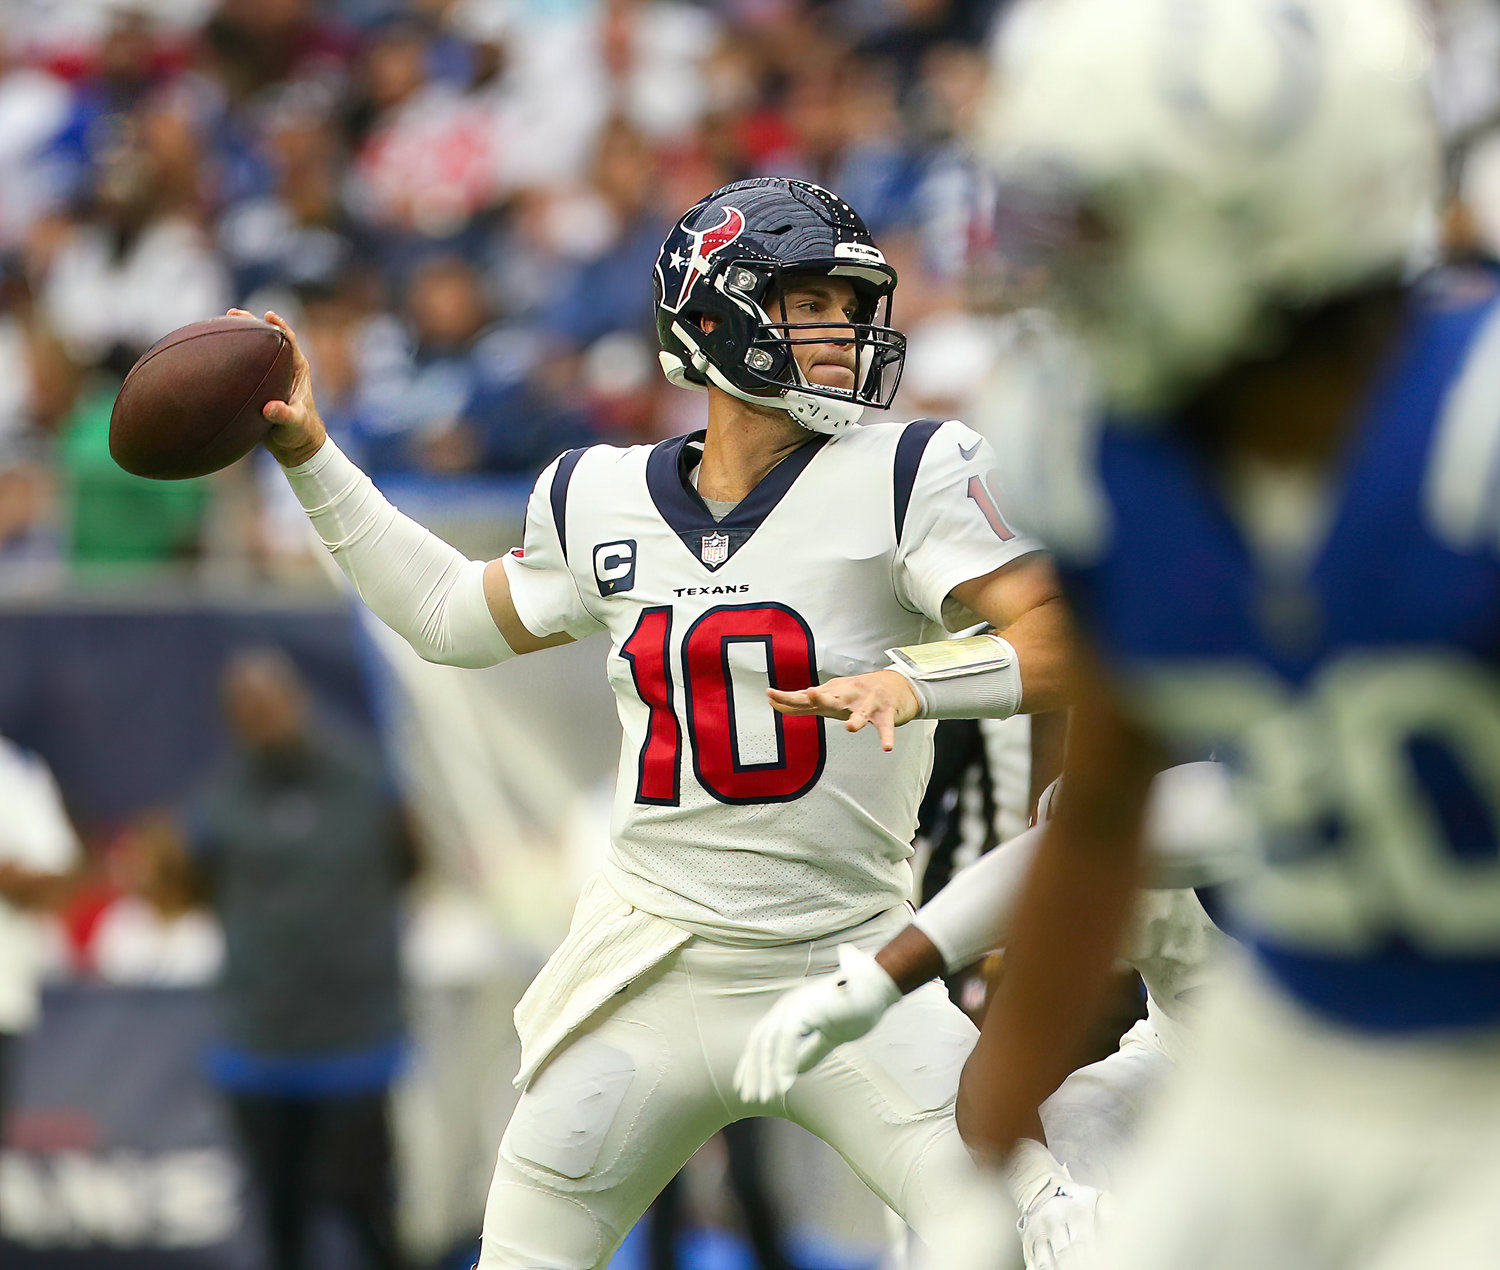 Houston Texans quarterback Davis Mills (10) passes the ball during an NFL game between the Texans and the Colts on September 11, 2022 in Houston. The game ended in a 20-20 tie after a scoreless overtime period.